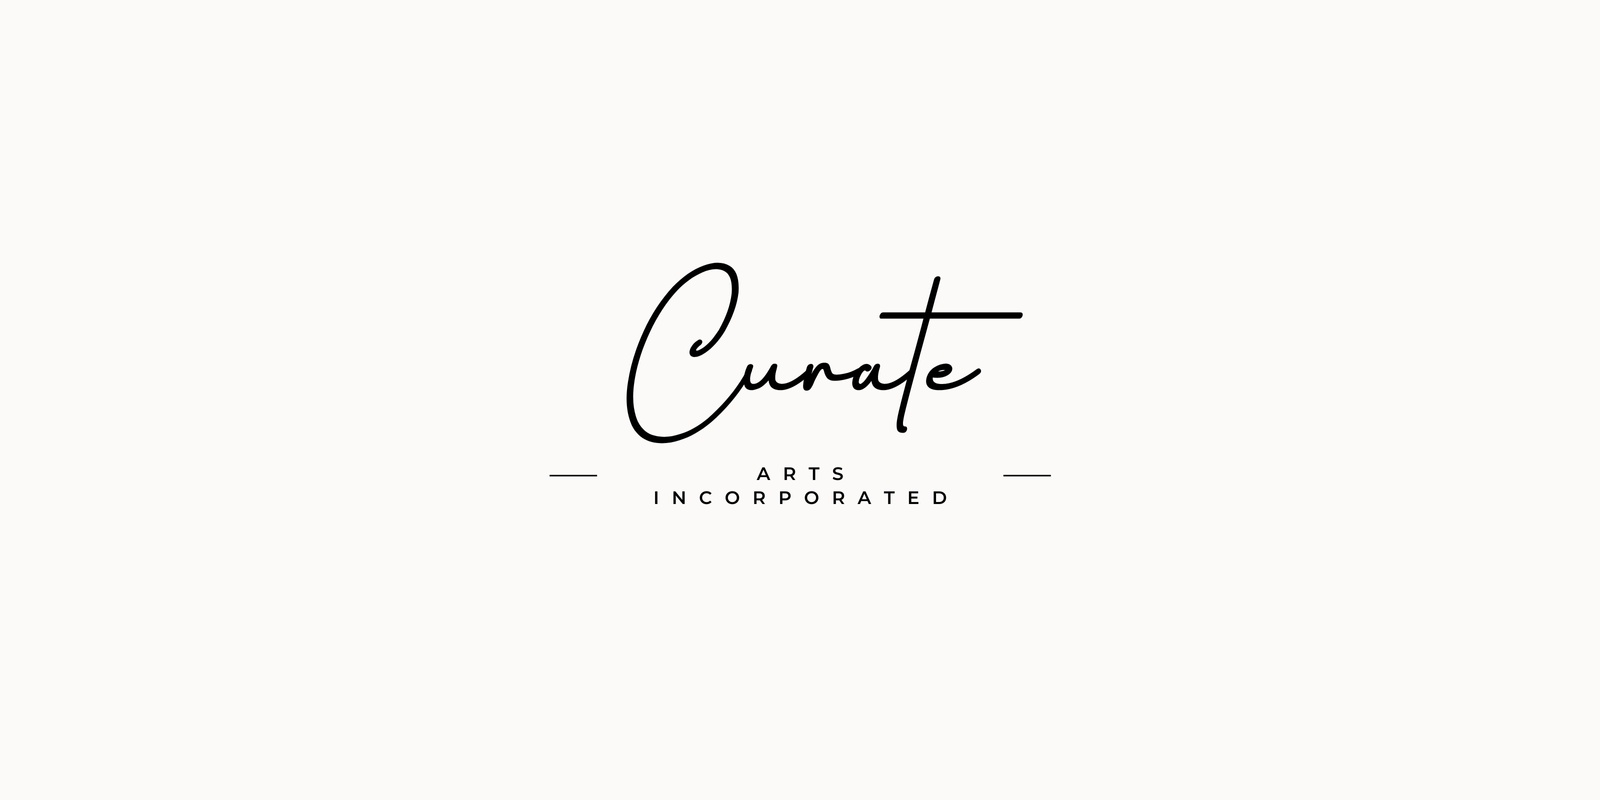 Curate's banner